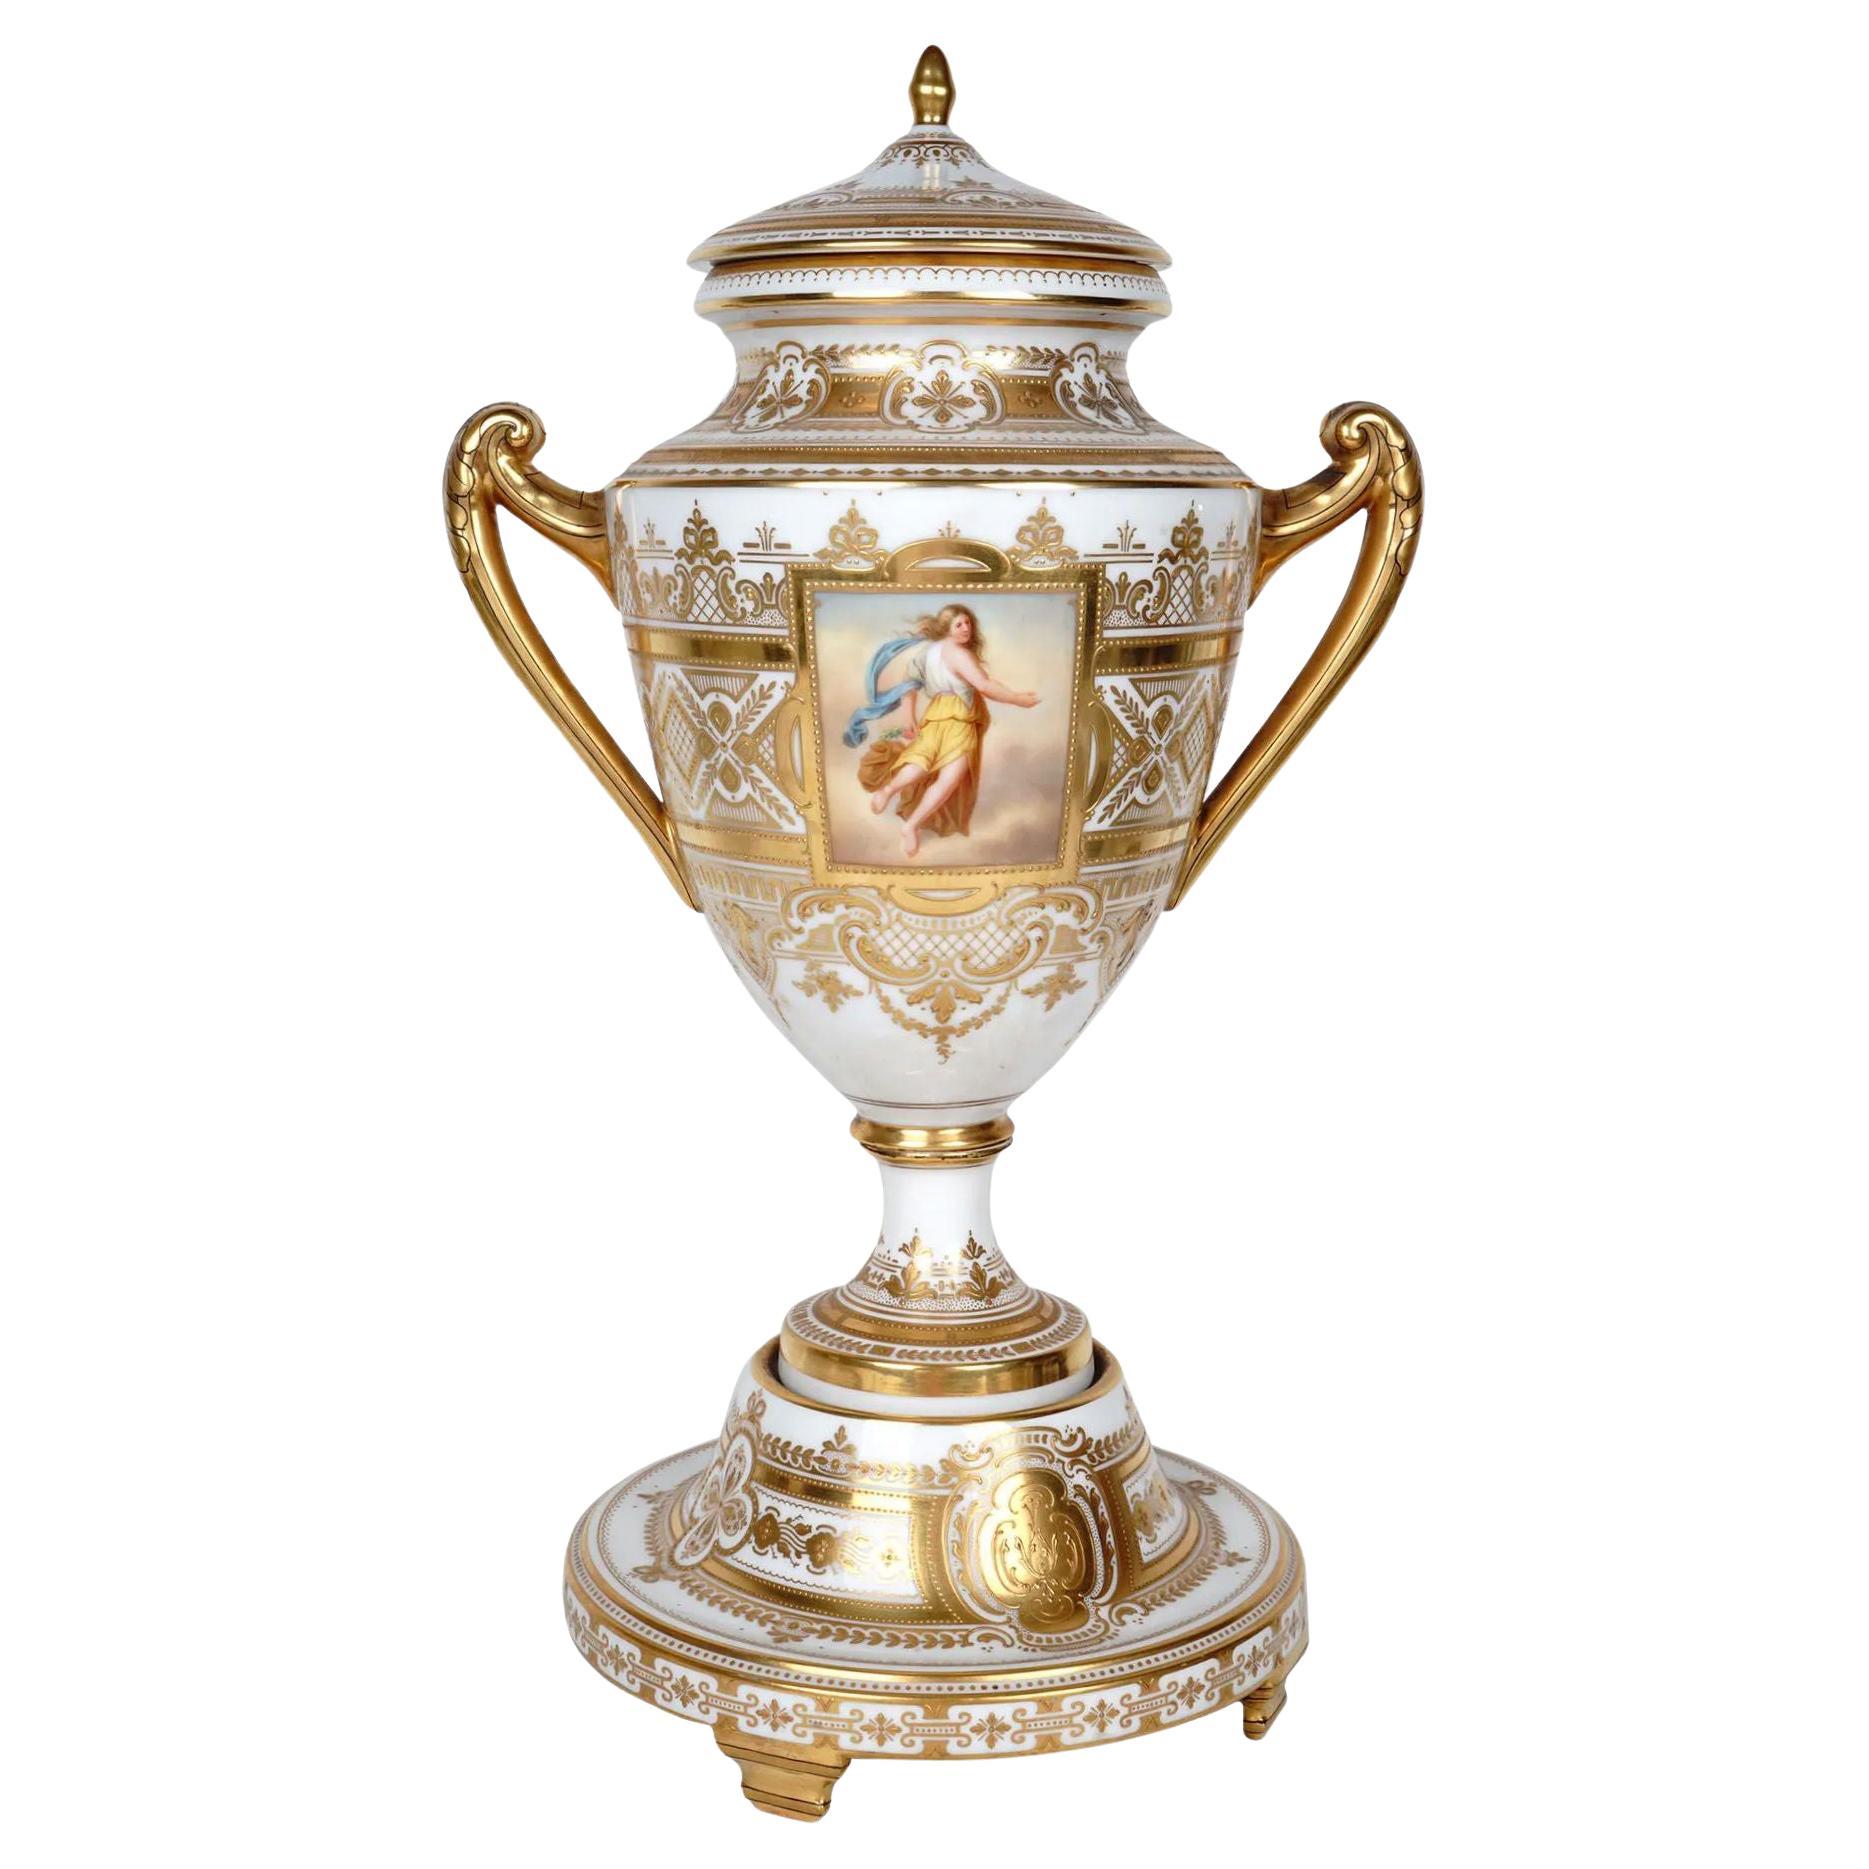 Porcelain Vase with Cover by Royal Vienna